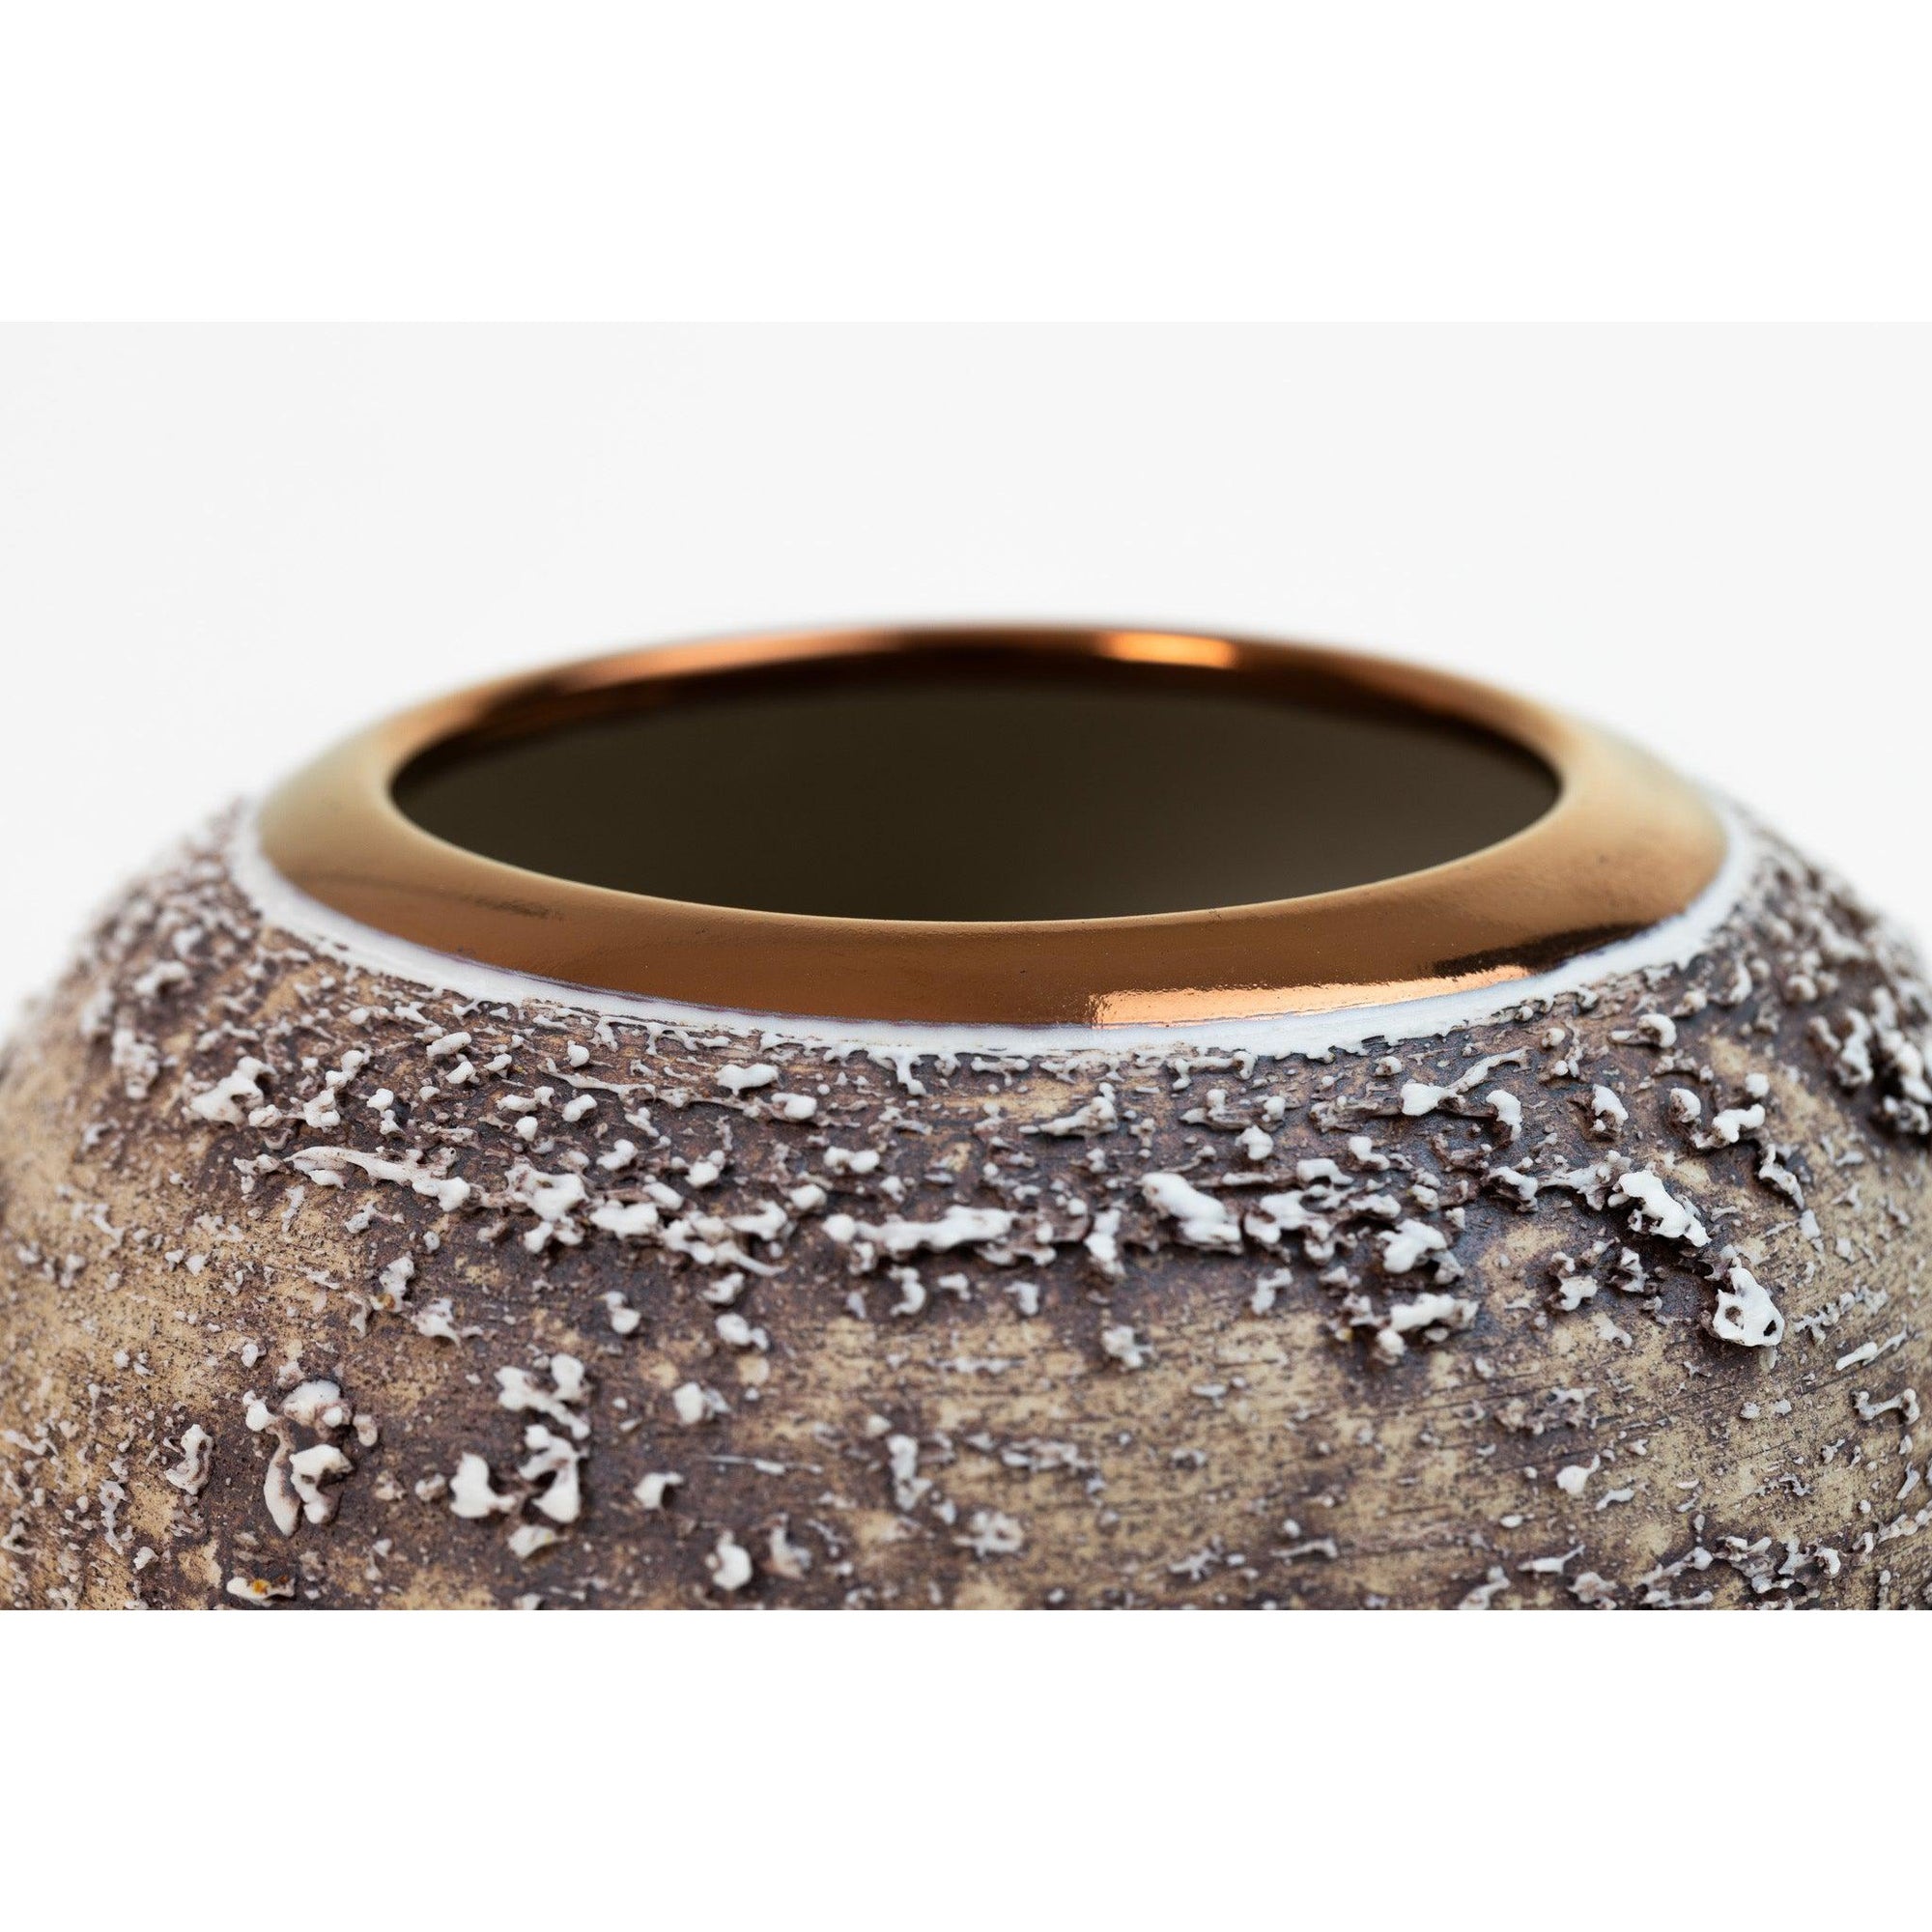 PGX30 Terra Textured Orb with Copper Lustre Rim by Alex McCarthy, available at Padstow Gallery, Cornwall